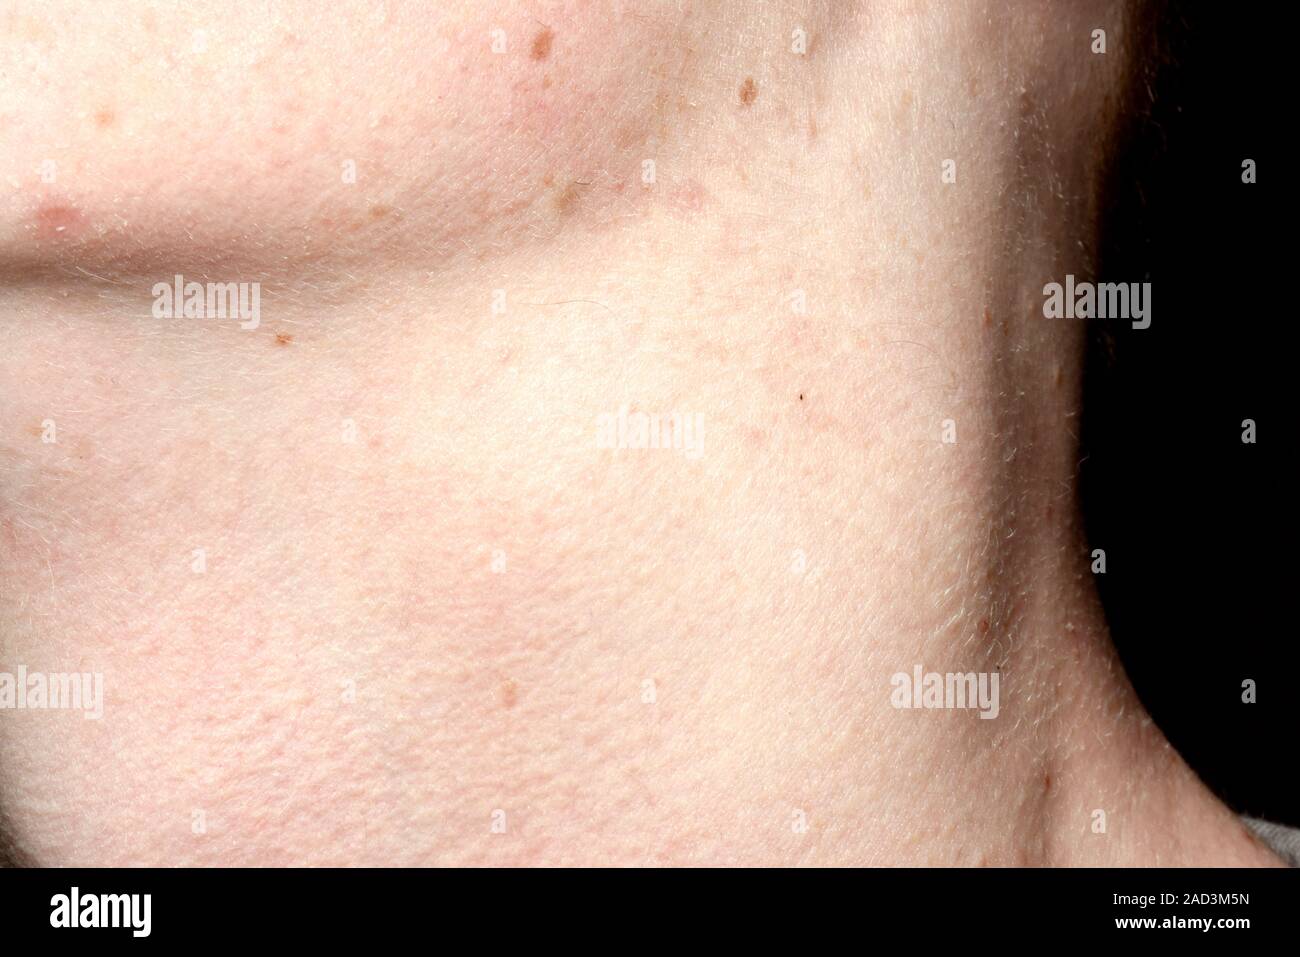 Enlarged Lymph Nodes Close Up Of The Swollen Neck Of An 18 Year Old